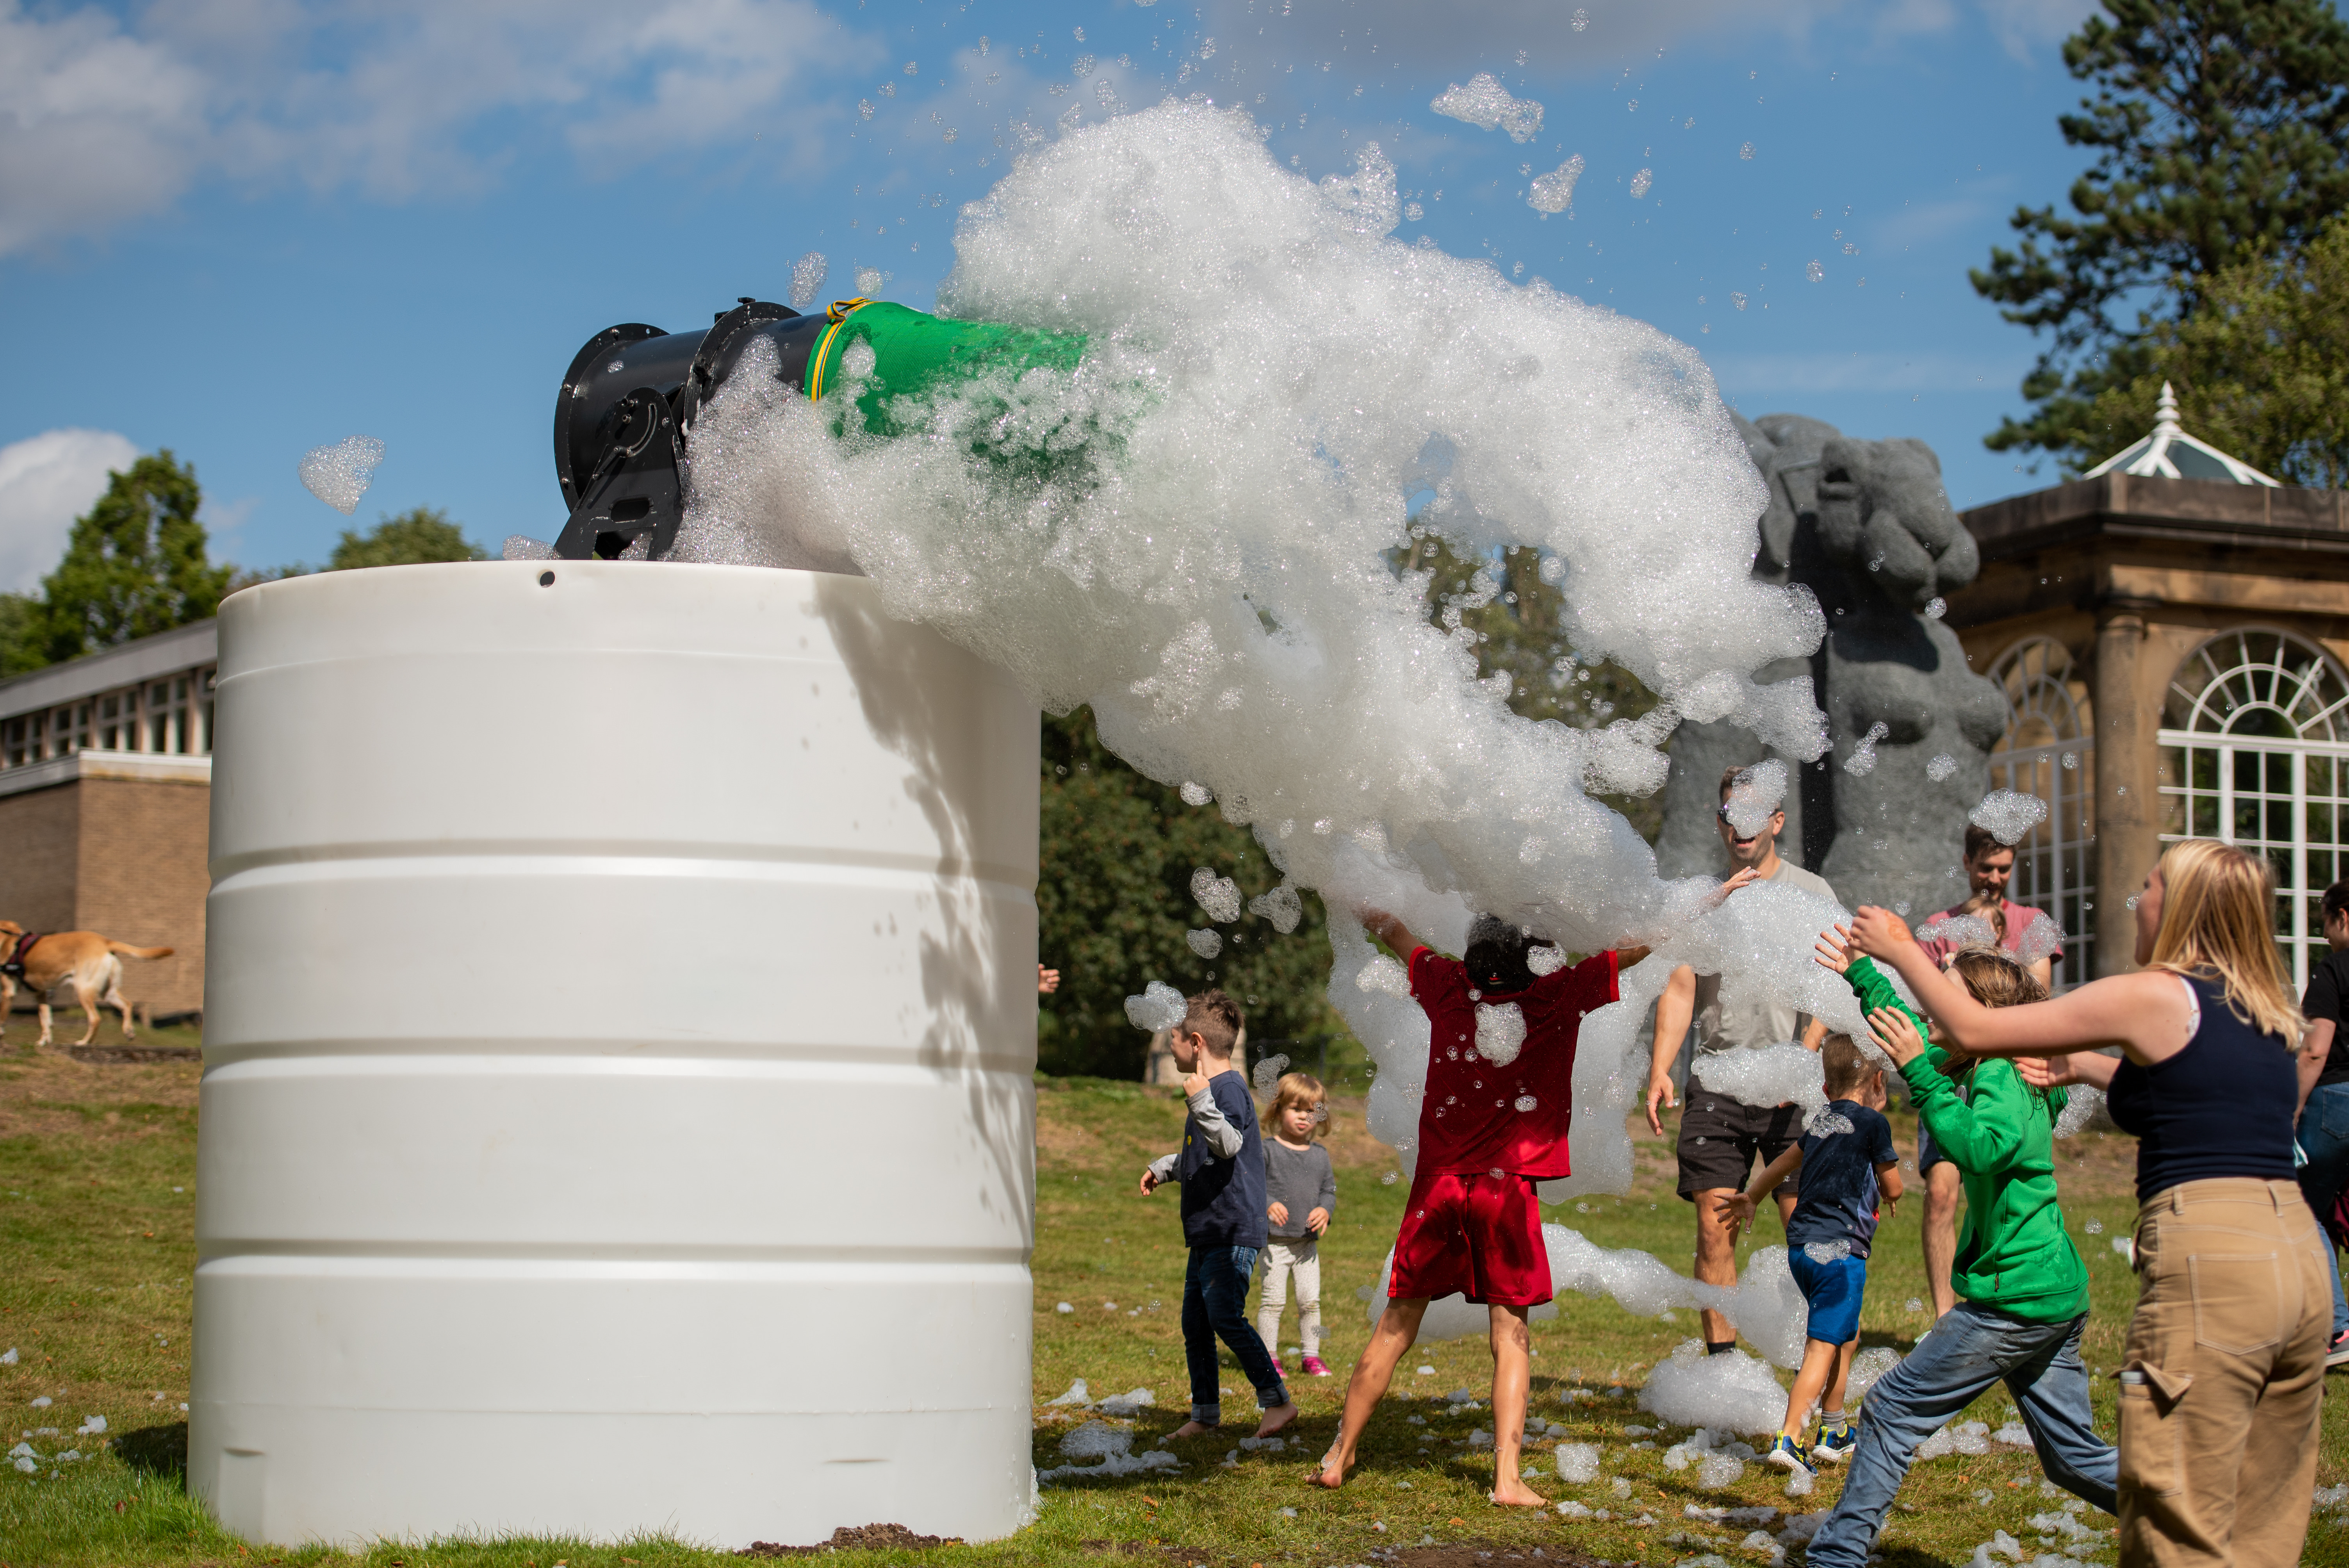 A group of people playing in a cloud of foam outdoors